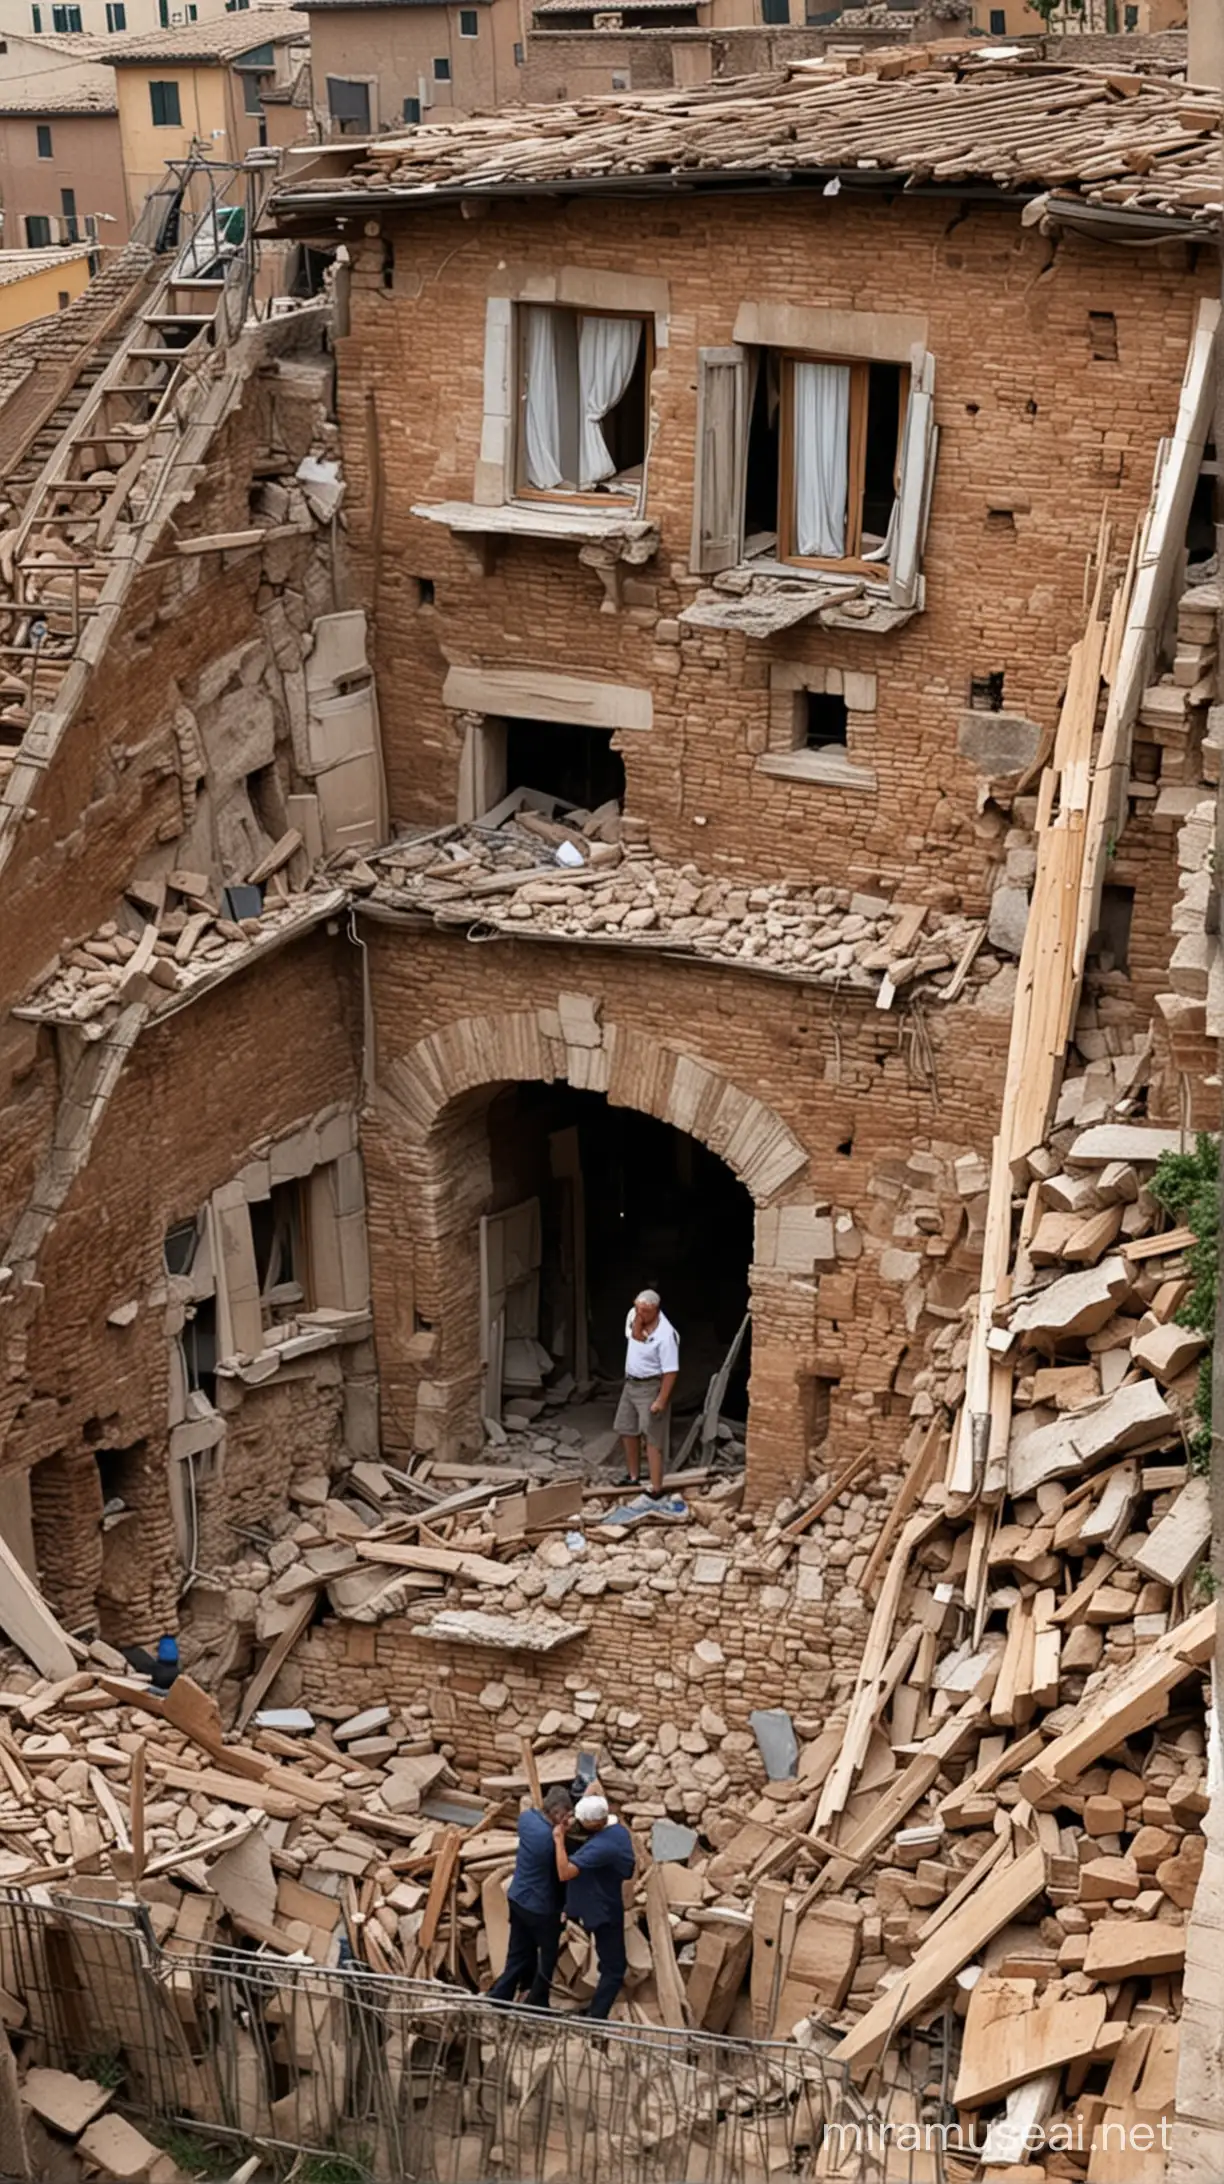 Ancient times In Rome builder's poorly constructed house collapses and kills owners son.